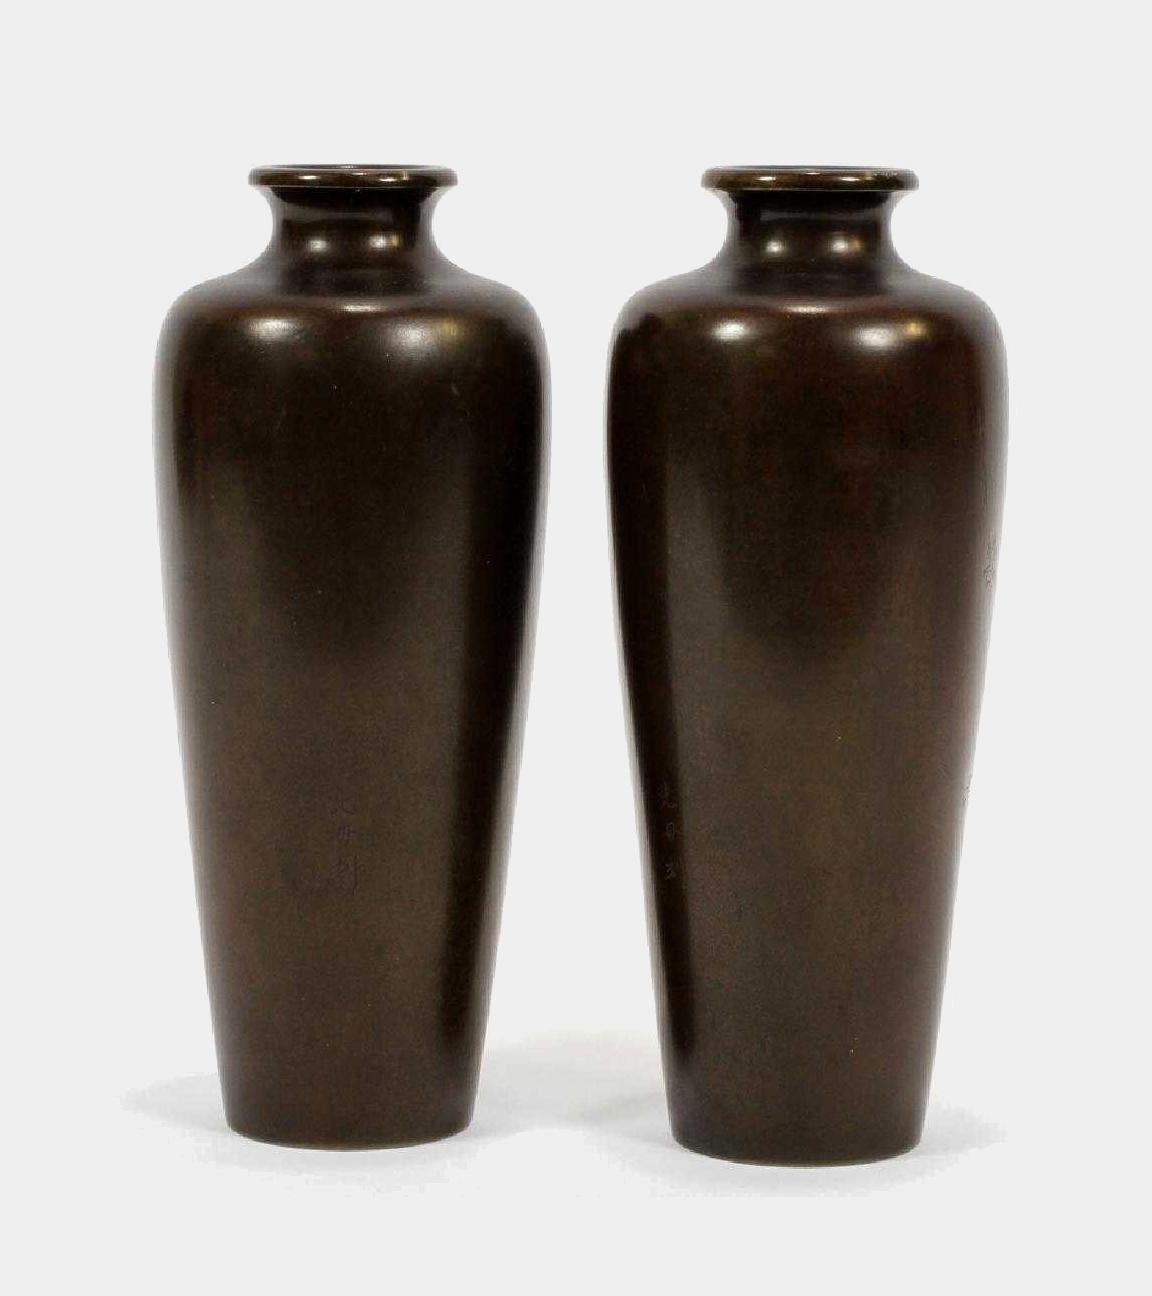 A pair of elegant vases of solid oiled bronze from the Meiji era, Japan (1868-1912). In a Classic Meiping shape, the pair has a mirrored inlay with gold, silver and red enamel that depicts a pair of roosters perched on plum branches in blossom. The